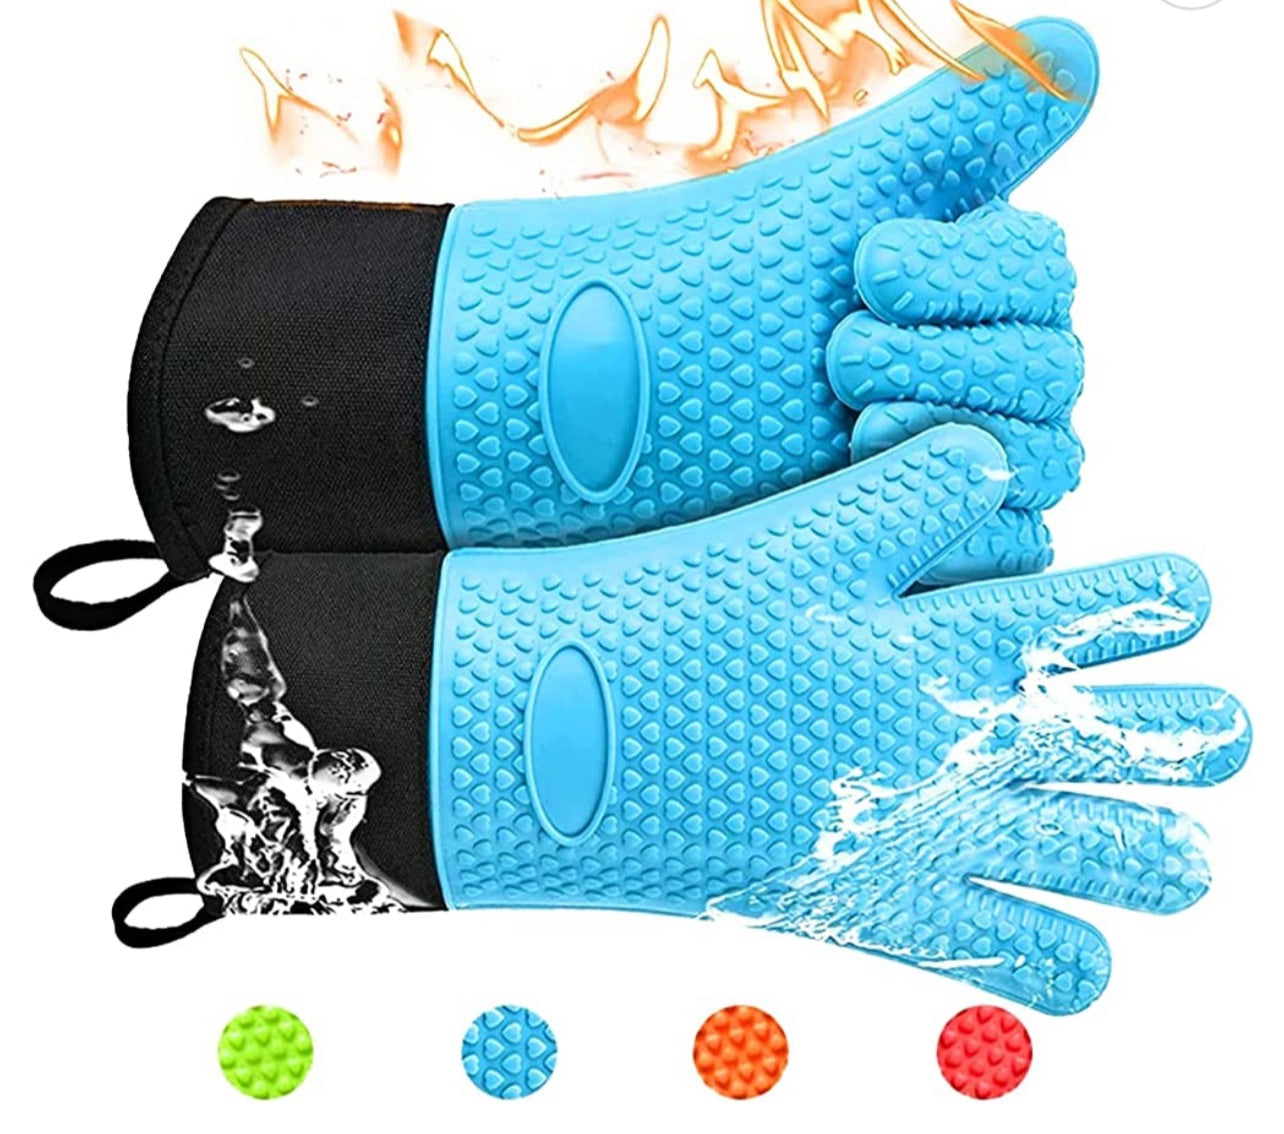 Non- Slip Heat Resistant Pot Holders Silicone Microwave Gloves Oven Baking Hot Pot BBQ Gloves Silicone Oven Mitt.    Non- Slip Heat Resistant Pot Holders Silicone Microwave Gloves Oven Baking Hot Pot BBQ Gloves Silicone Oven Mitt.